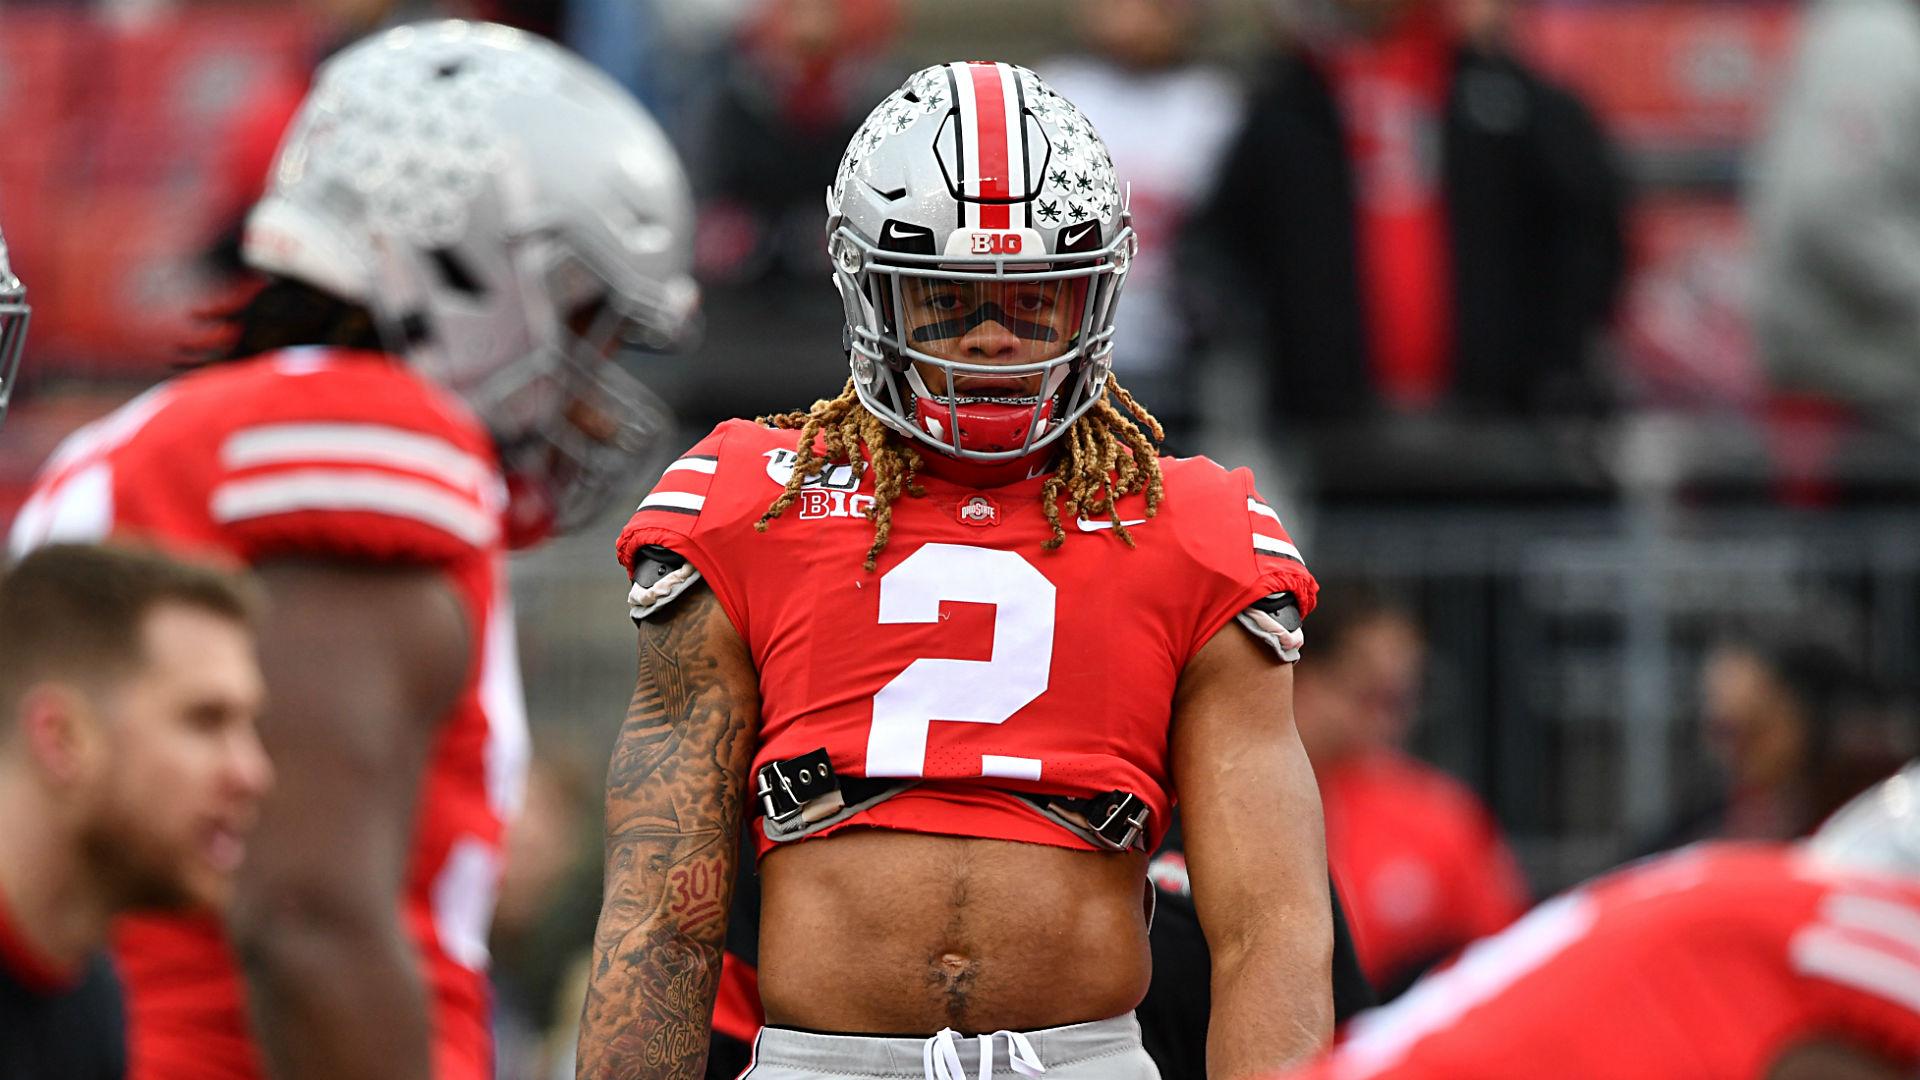 Ohio State's Chase Young revives a Heisman campaign voters better